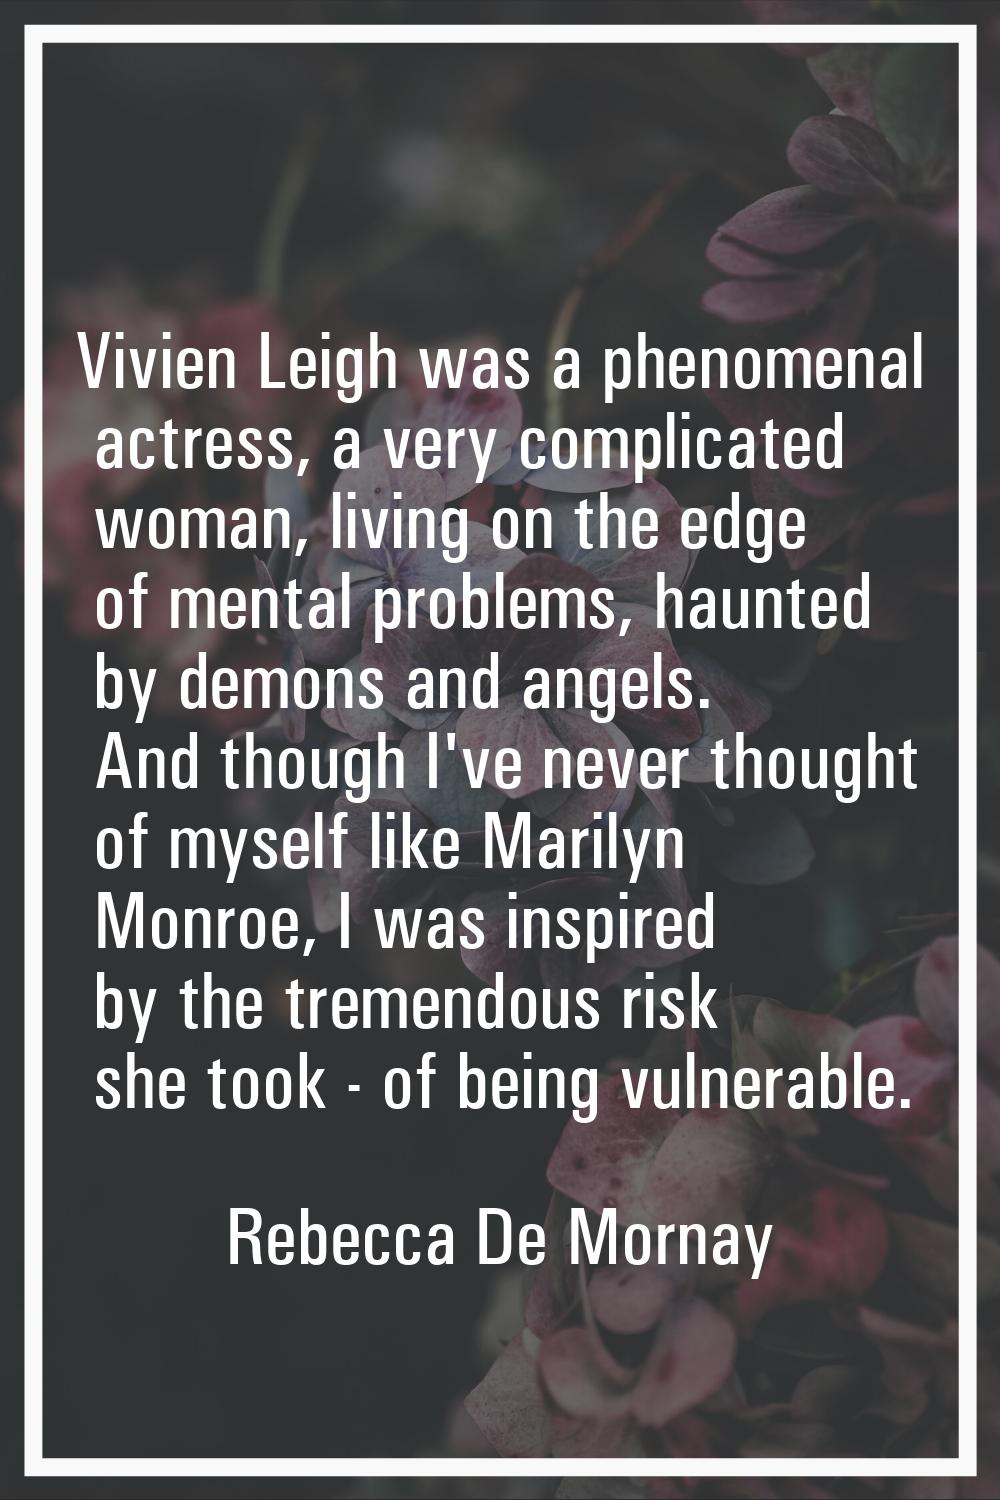 Vivien Leigh was a phenomenal actress, a very complicated woman, living on the edge of mental probl